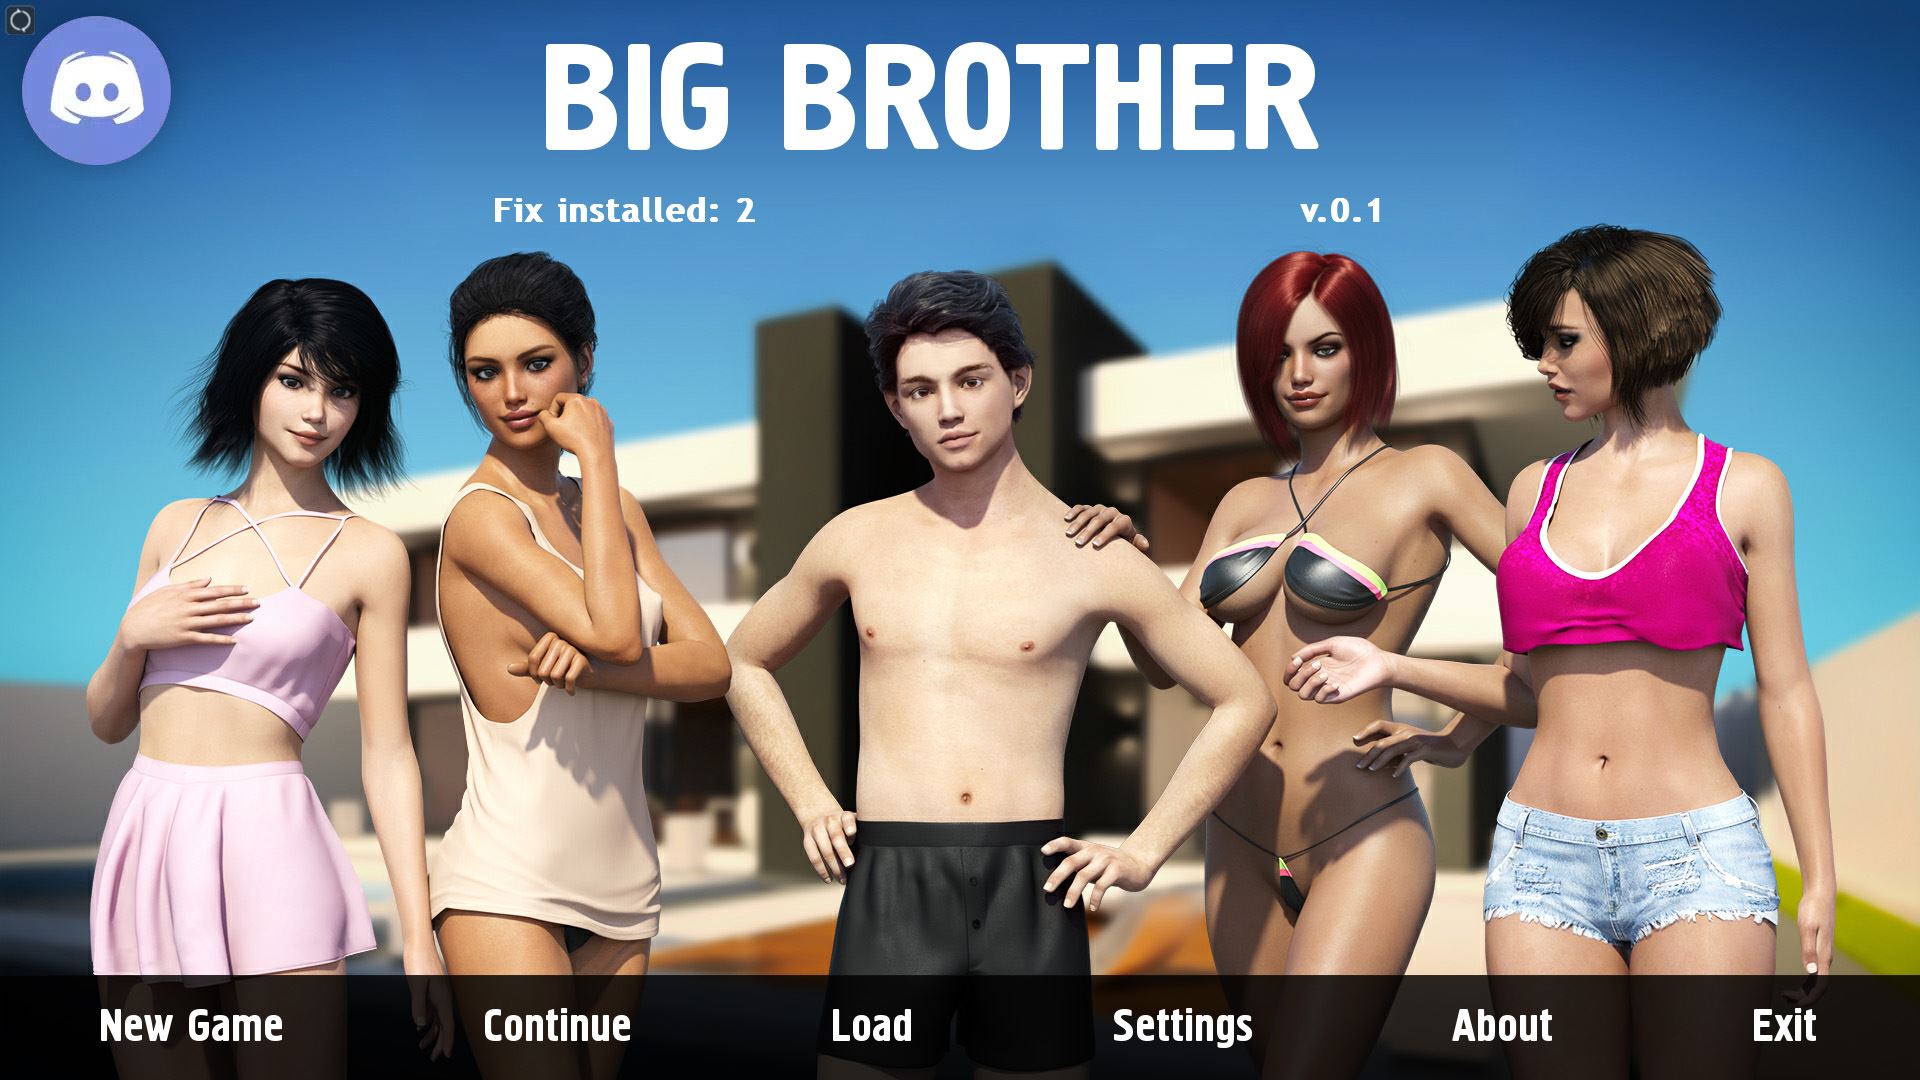 Big Brother: Ren'Py Remake Story Ren'Py Porn Sex Game v.1.02 - Fix 5  Download for Windows, MacOS, Linux, Android